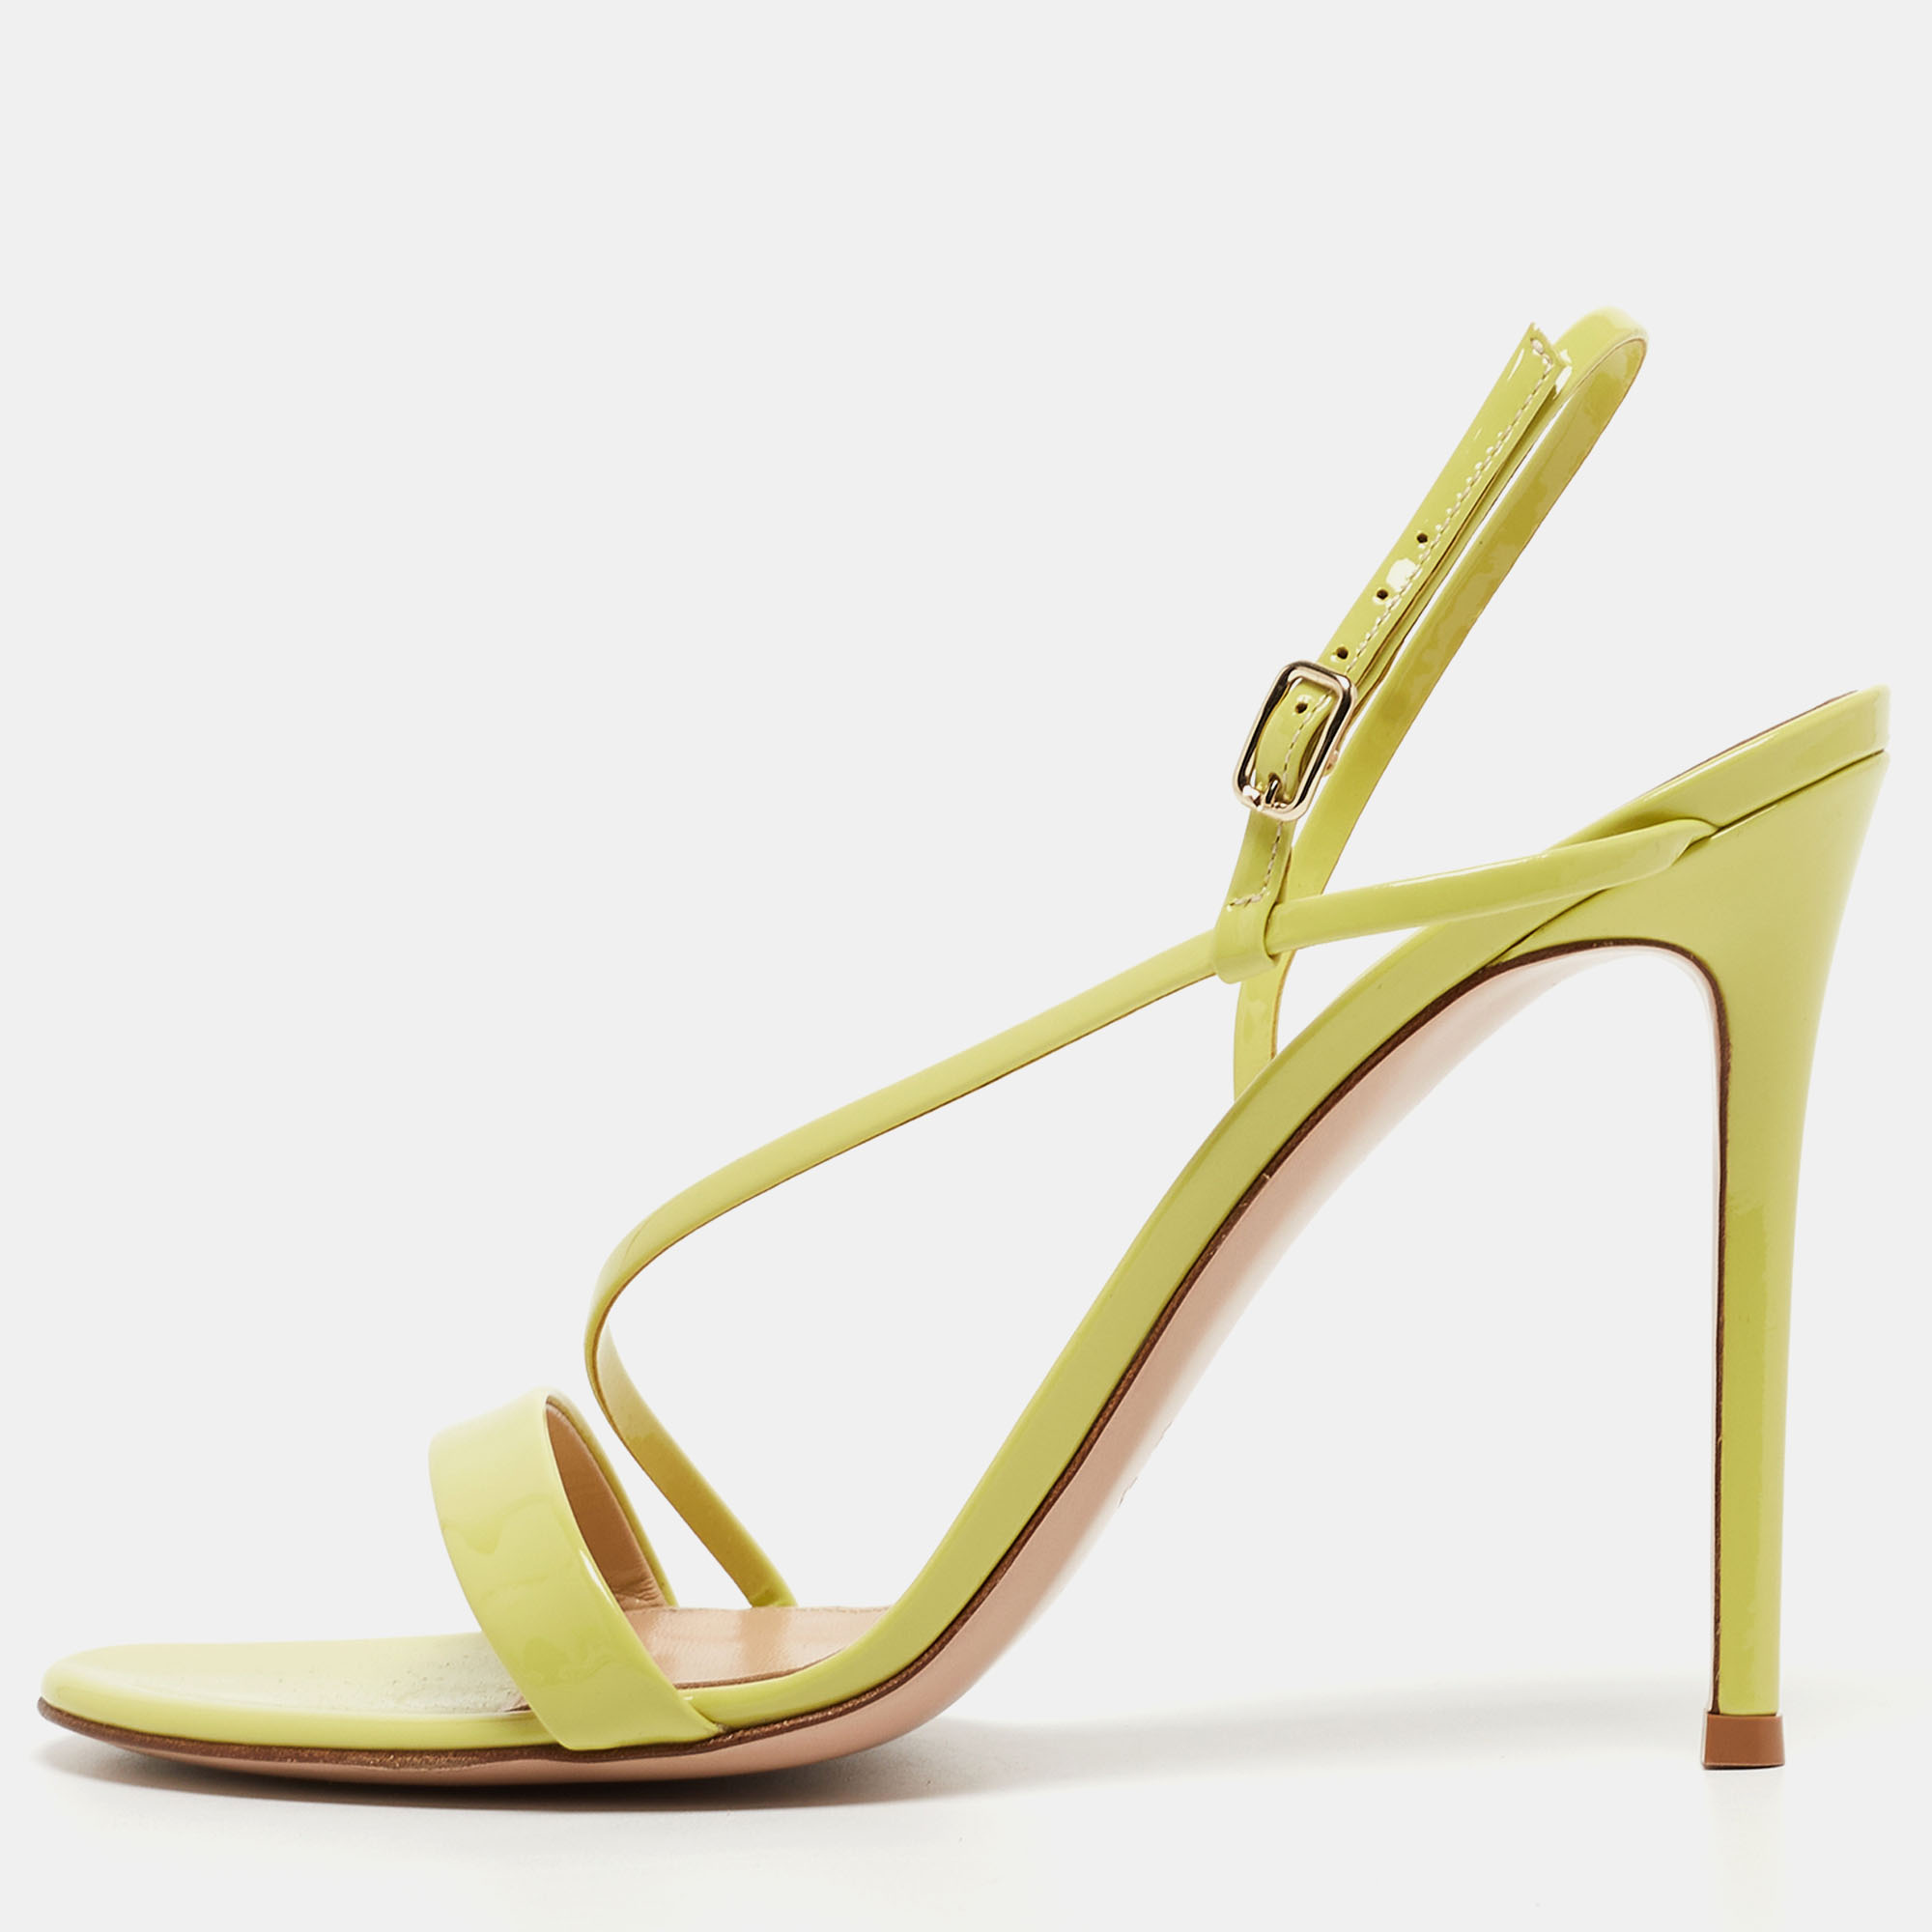 Gianvito rossi light green patent leather manhattan sandals size 40